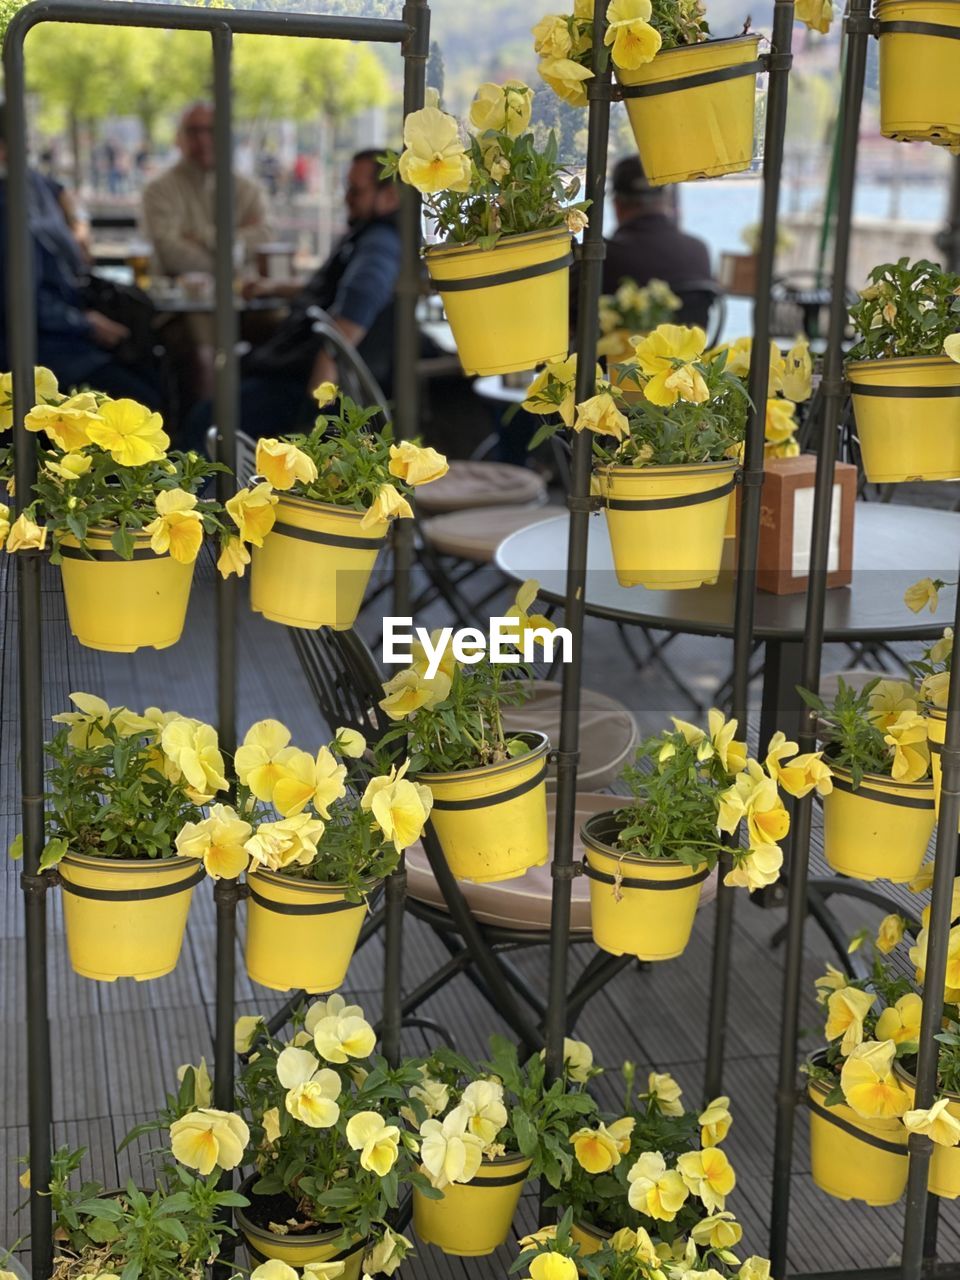 yellow, plant, flower, flowering plant, floristry, nature, growth, freshness, potted plant, floral design, beauty in nature, arrangement, retail, day, outdoors, business, no people, small business, fragility, business finance and industry, botany, flowerpot, greenhouse, large group of objects, abundance